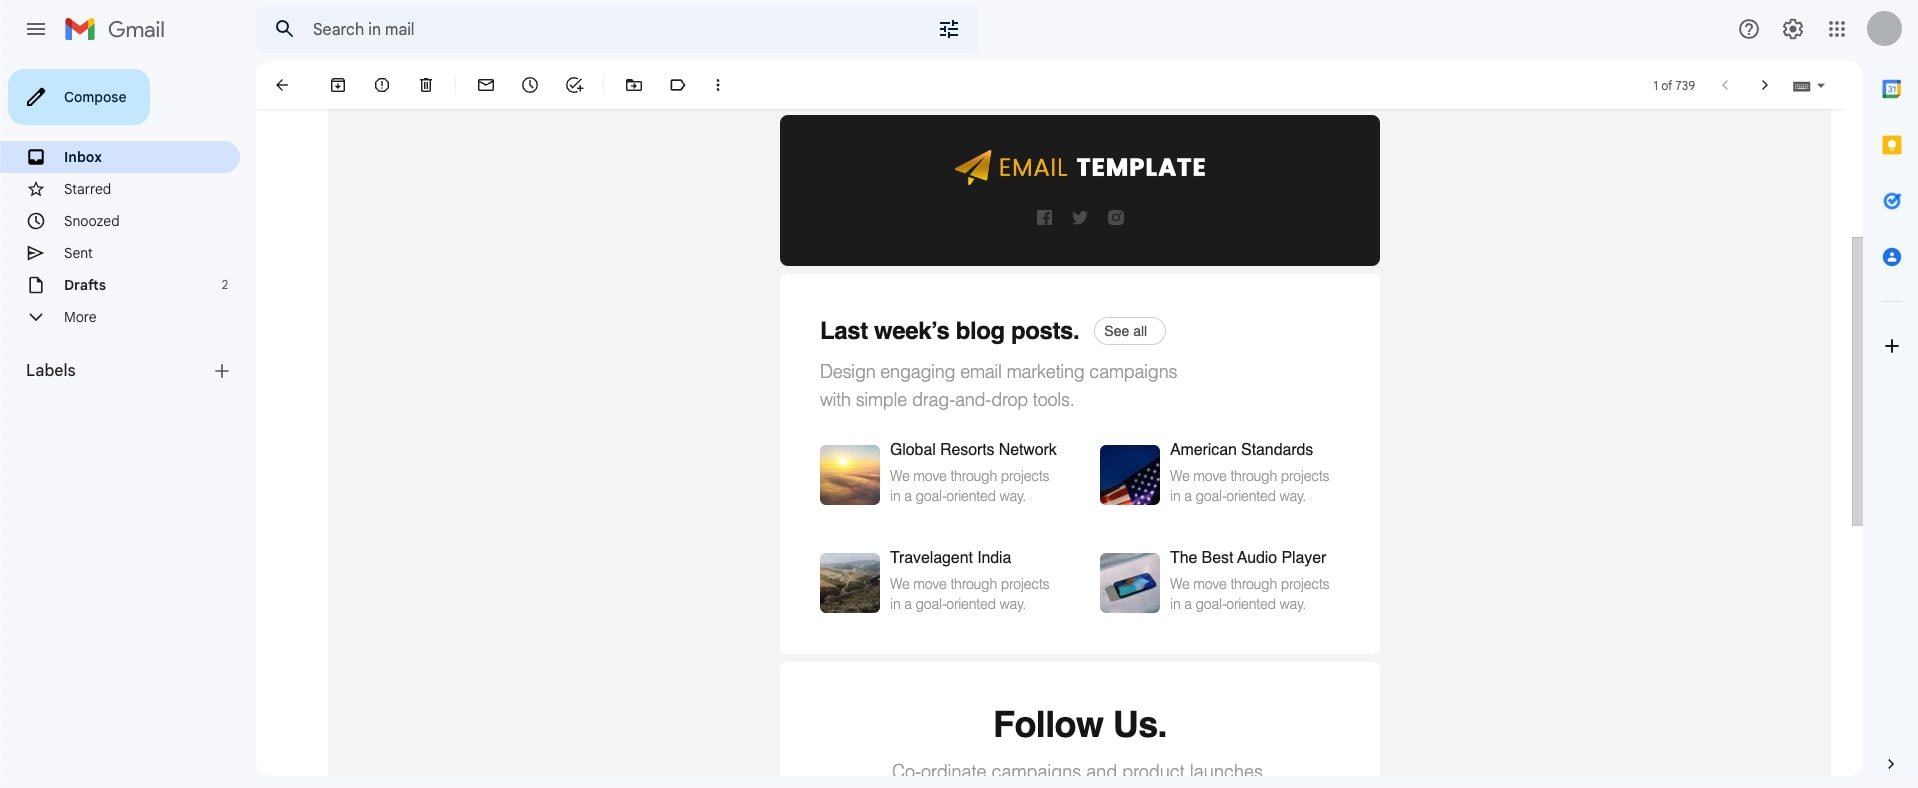 Gmail email template